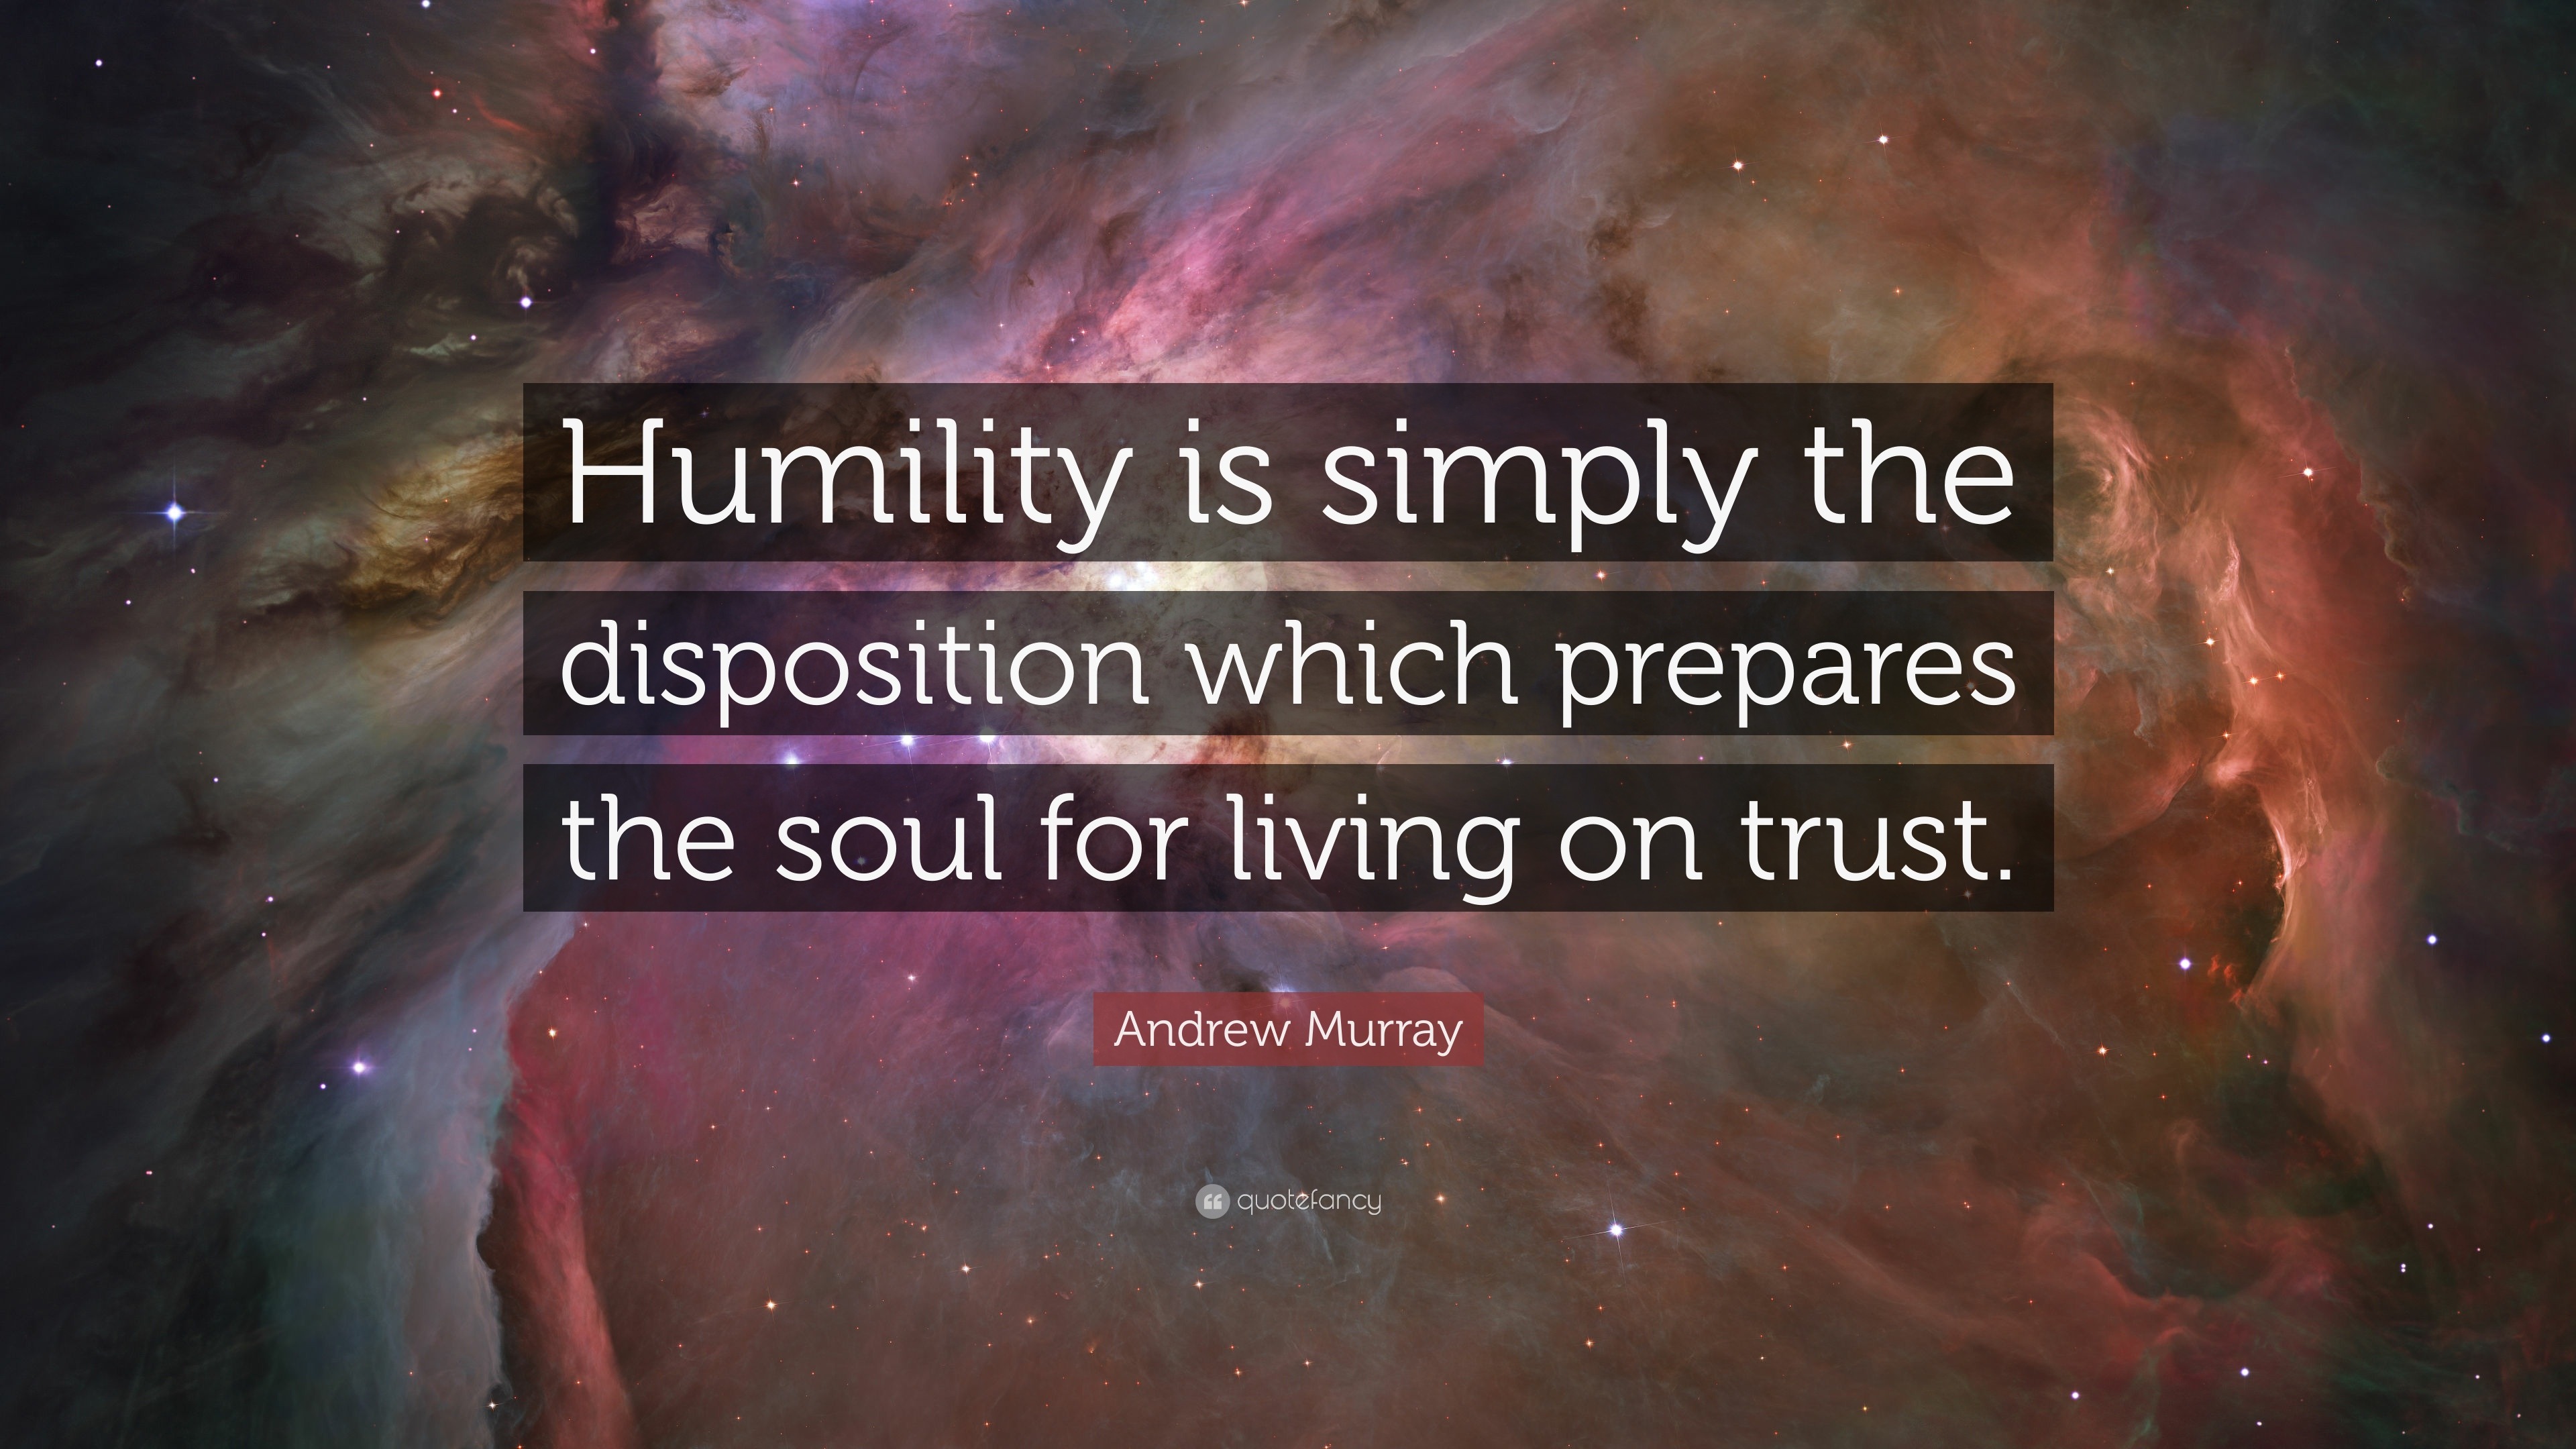 Andrew Murray Quote “Humility is simply the disposition which prepares